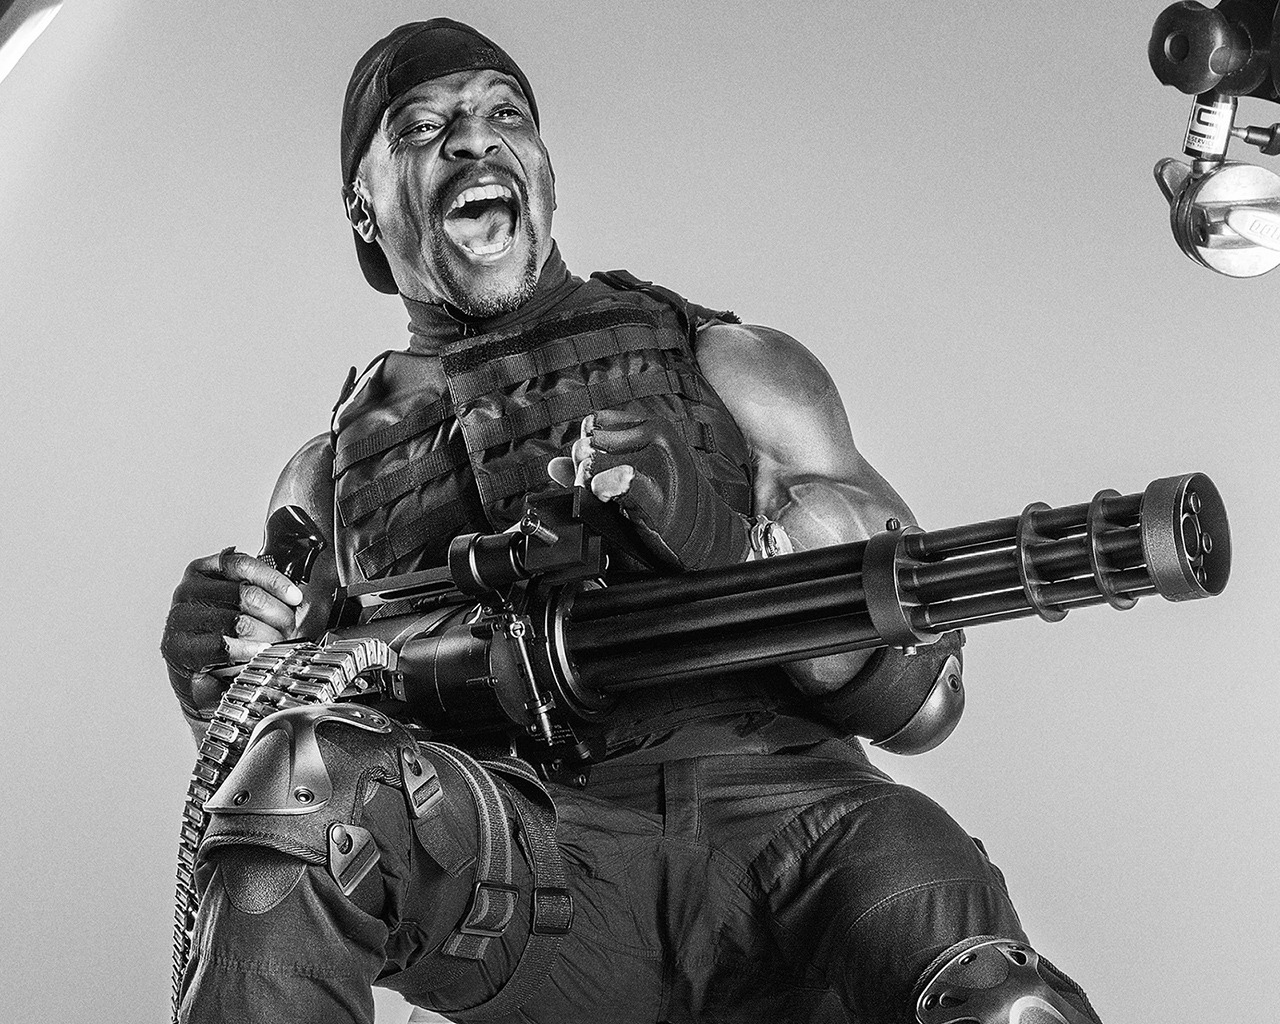 Terry Crews The Expendables 3 for 1280 x 1024 resolution